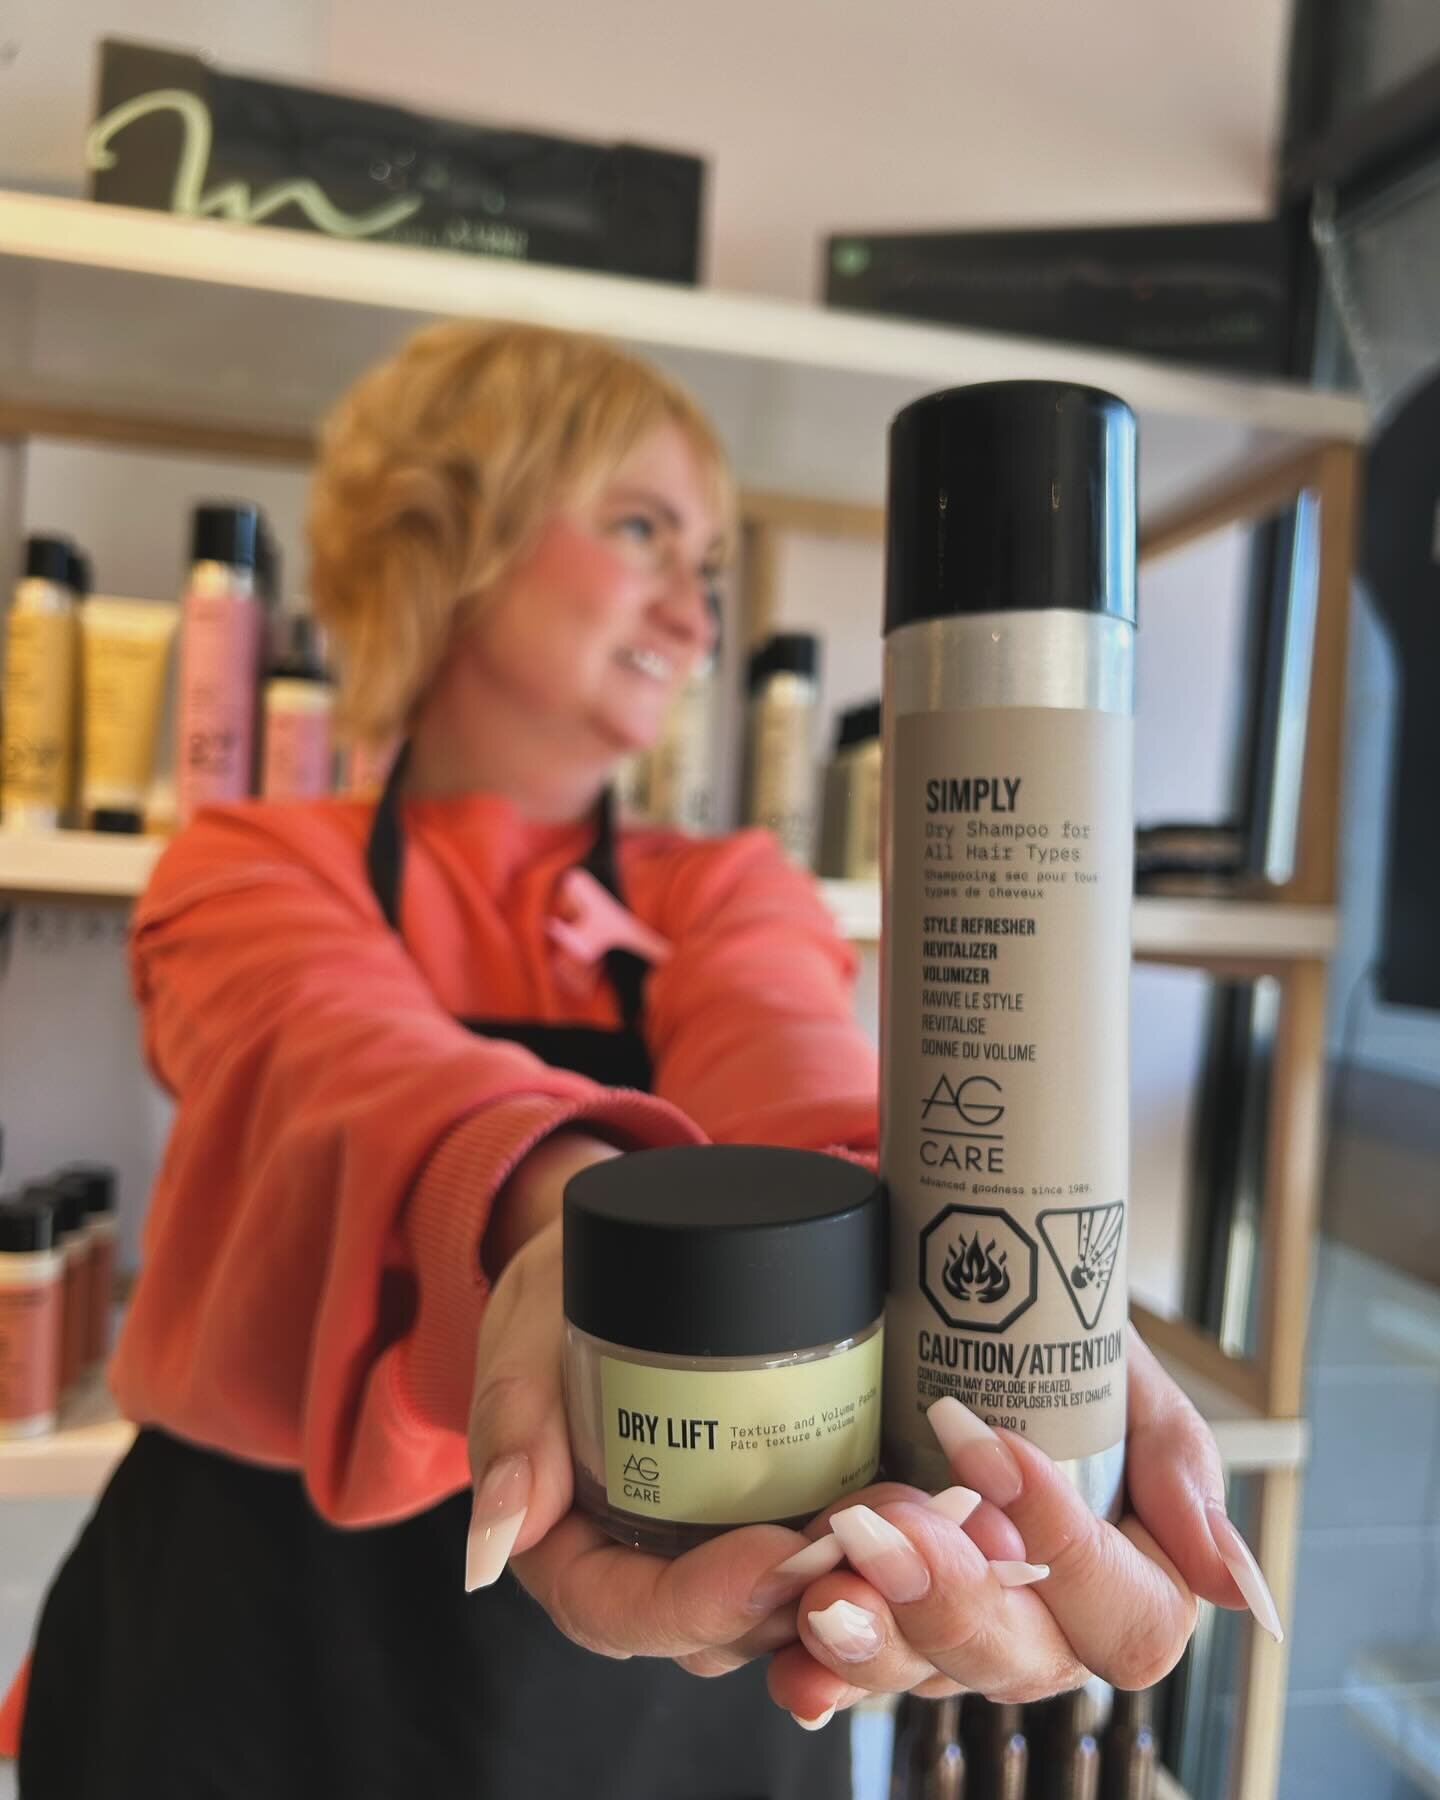 Happy Monday everyone! 
In honour of our employee of the month we are giving 10% off of her favourite products FOR THE REST OF THE MONTH🥰
AG&rsquo;s &ldquo;dry lift&rdquo; is Jenny&rsquo;s current obsession for added texture in short cuts! 
And of c